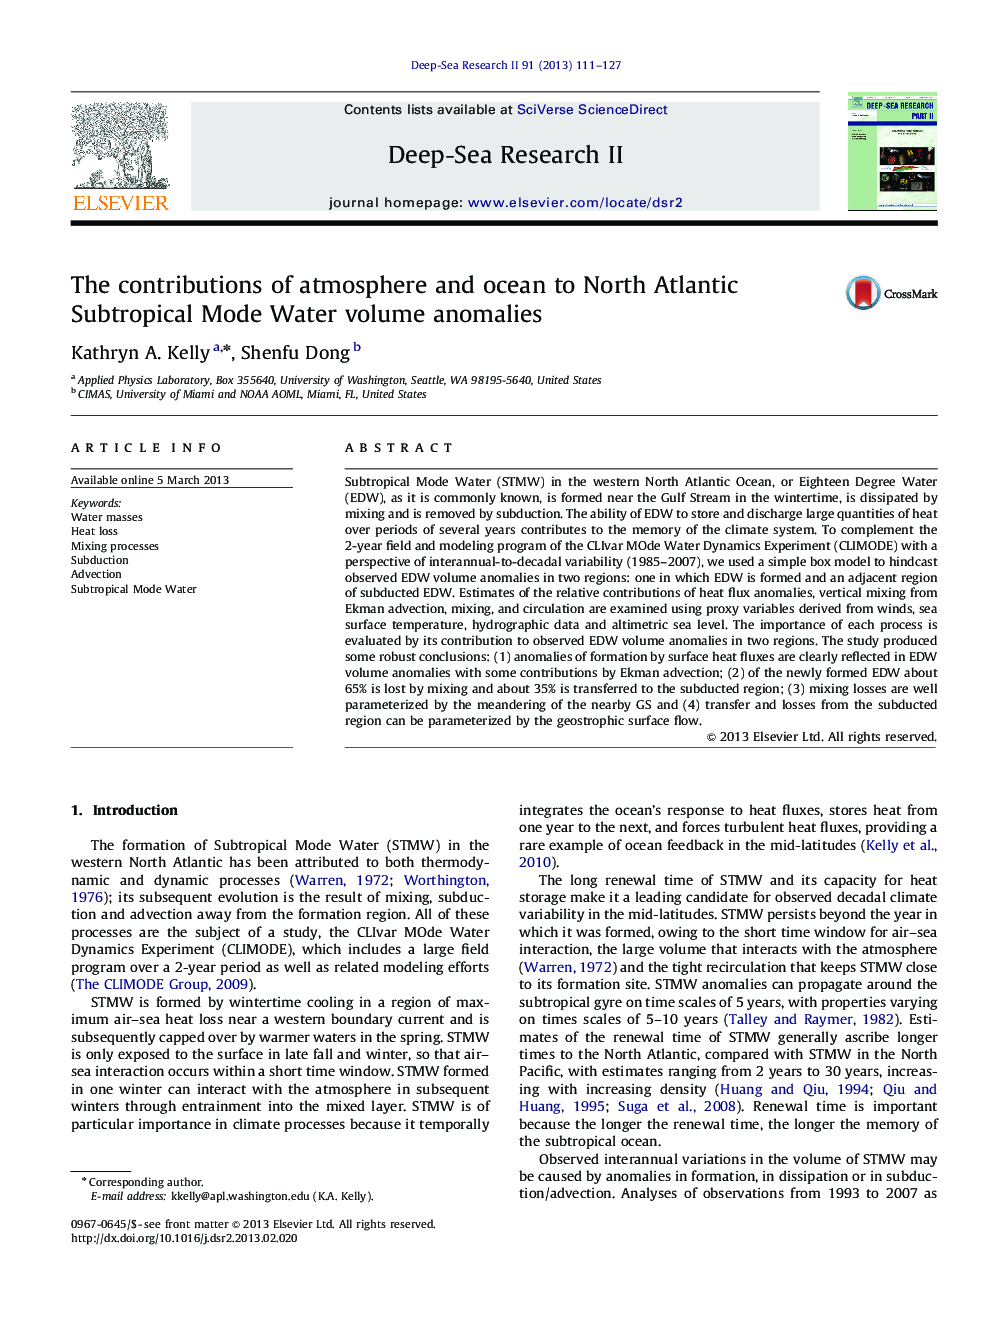 The contributions of atmosphere and ocean to North Atlantic Subtropical Mode Water volume anomalies